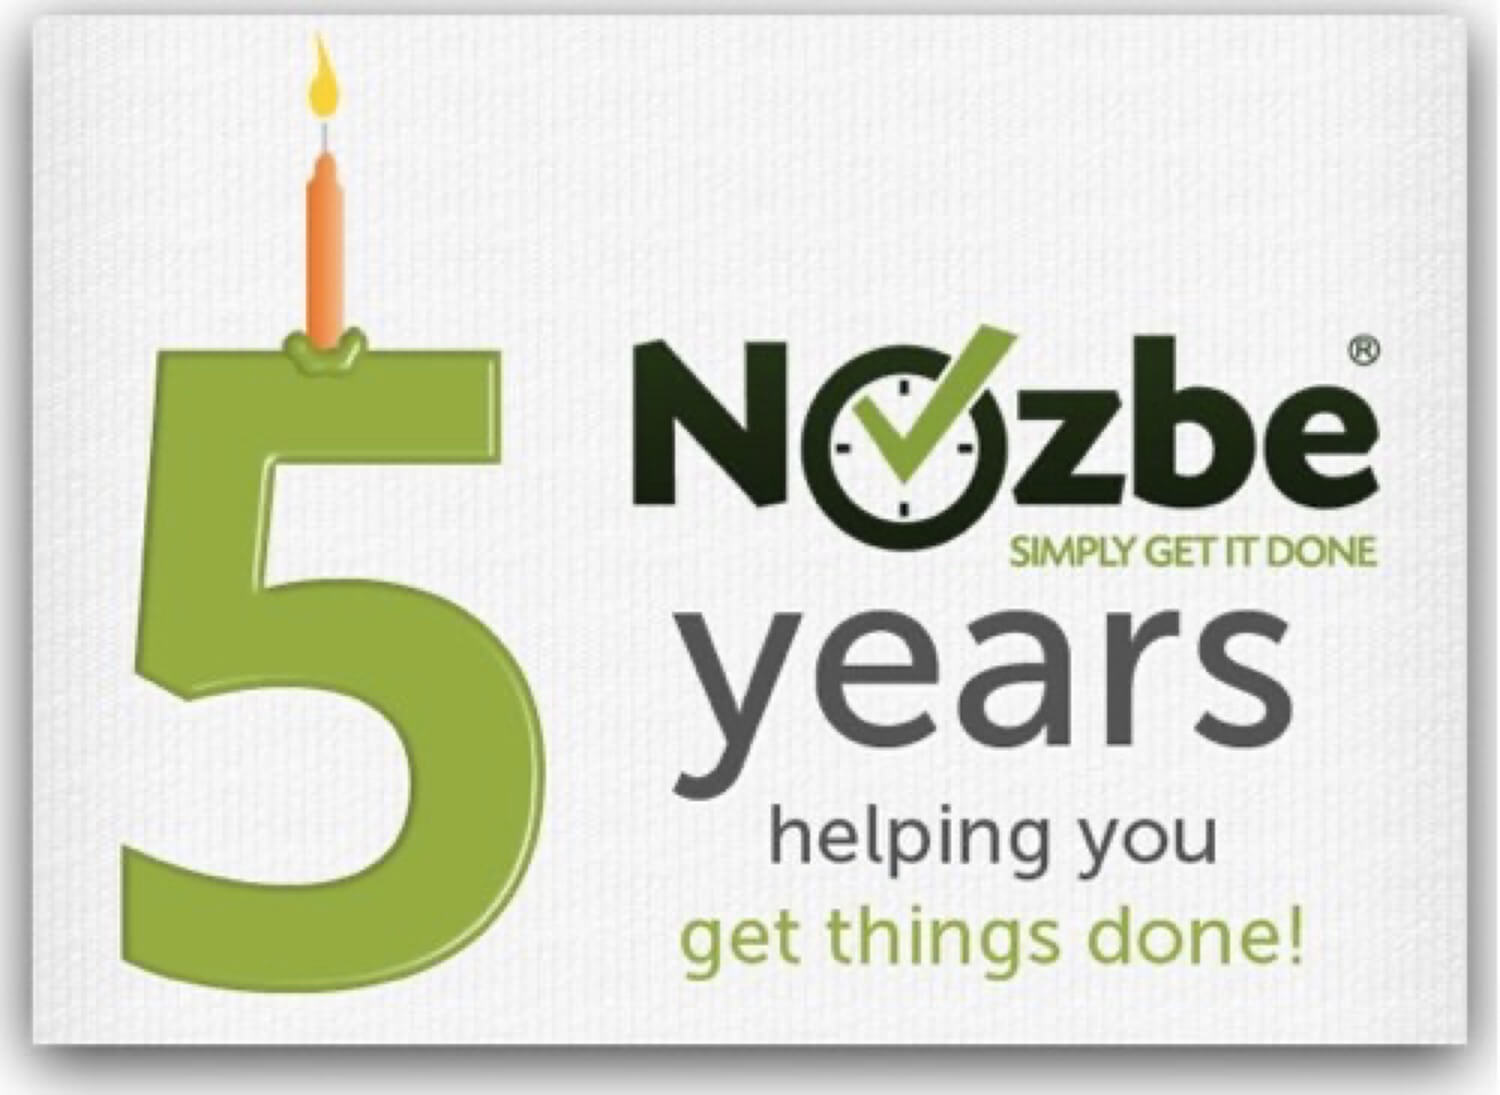 5 years helping folks get things done